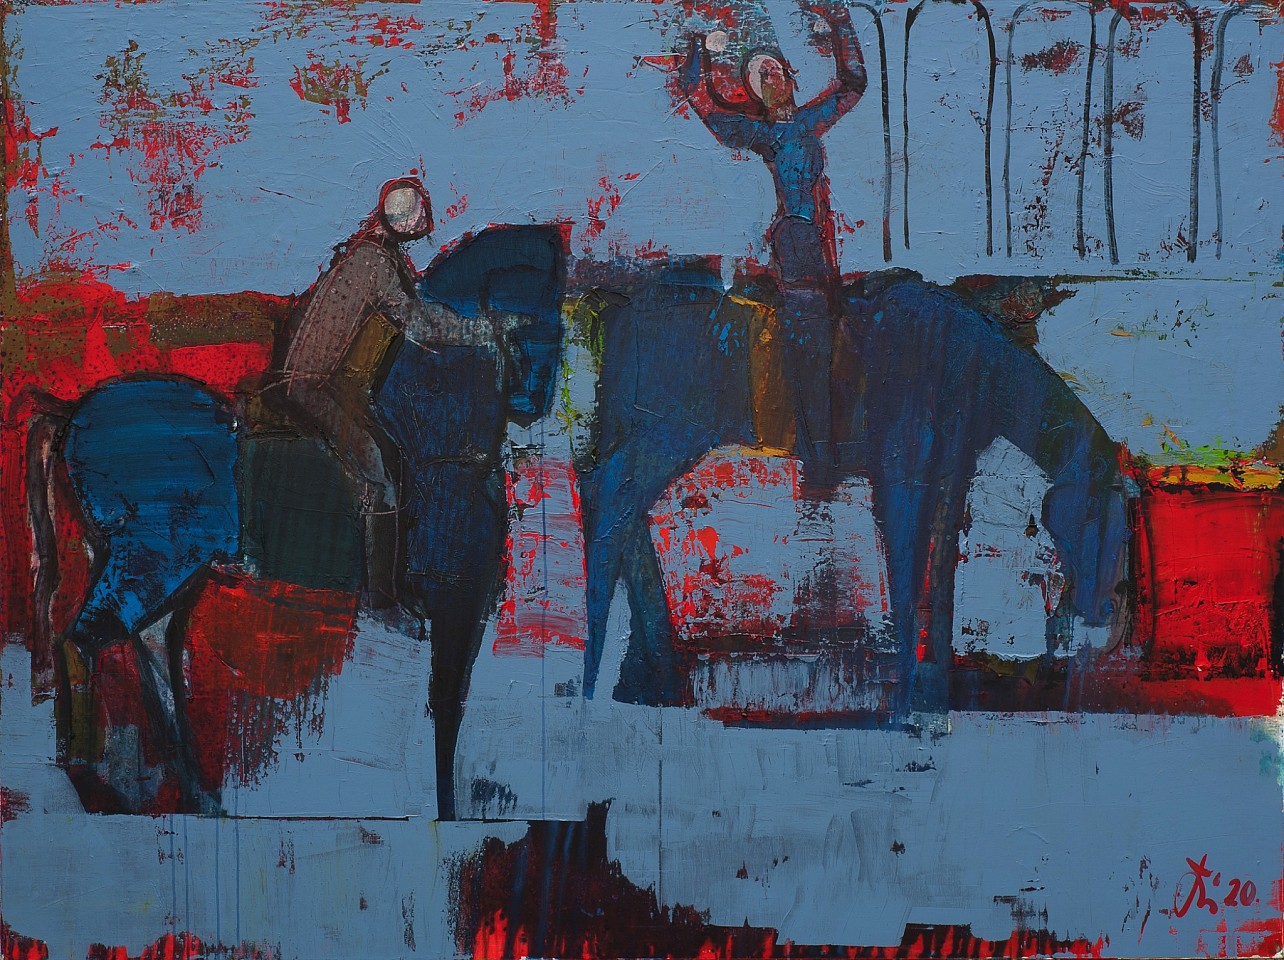 Serhiy Hai, Horses and Riders, 2020
Oil & Acrylic on canvas, 59.5" x 74.25", 60" x 80" framed
SY 119
Price Upon Request